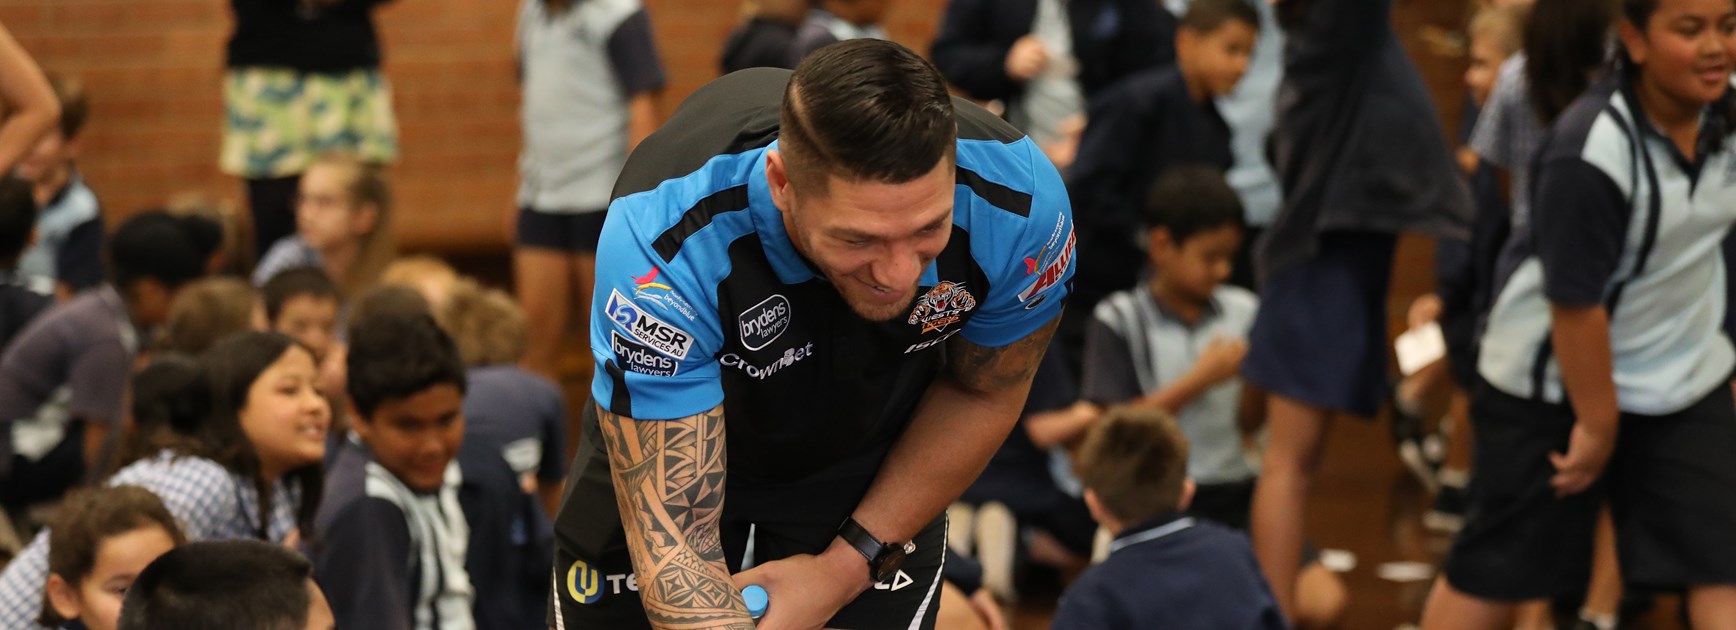 Wests Tigers spread wellbeing message in South West Sydney